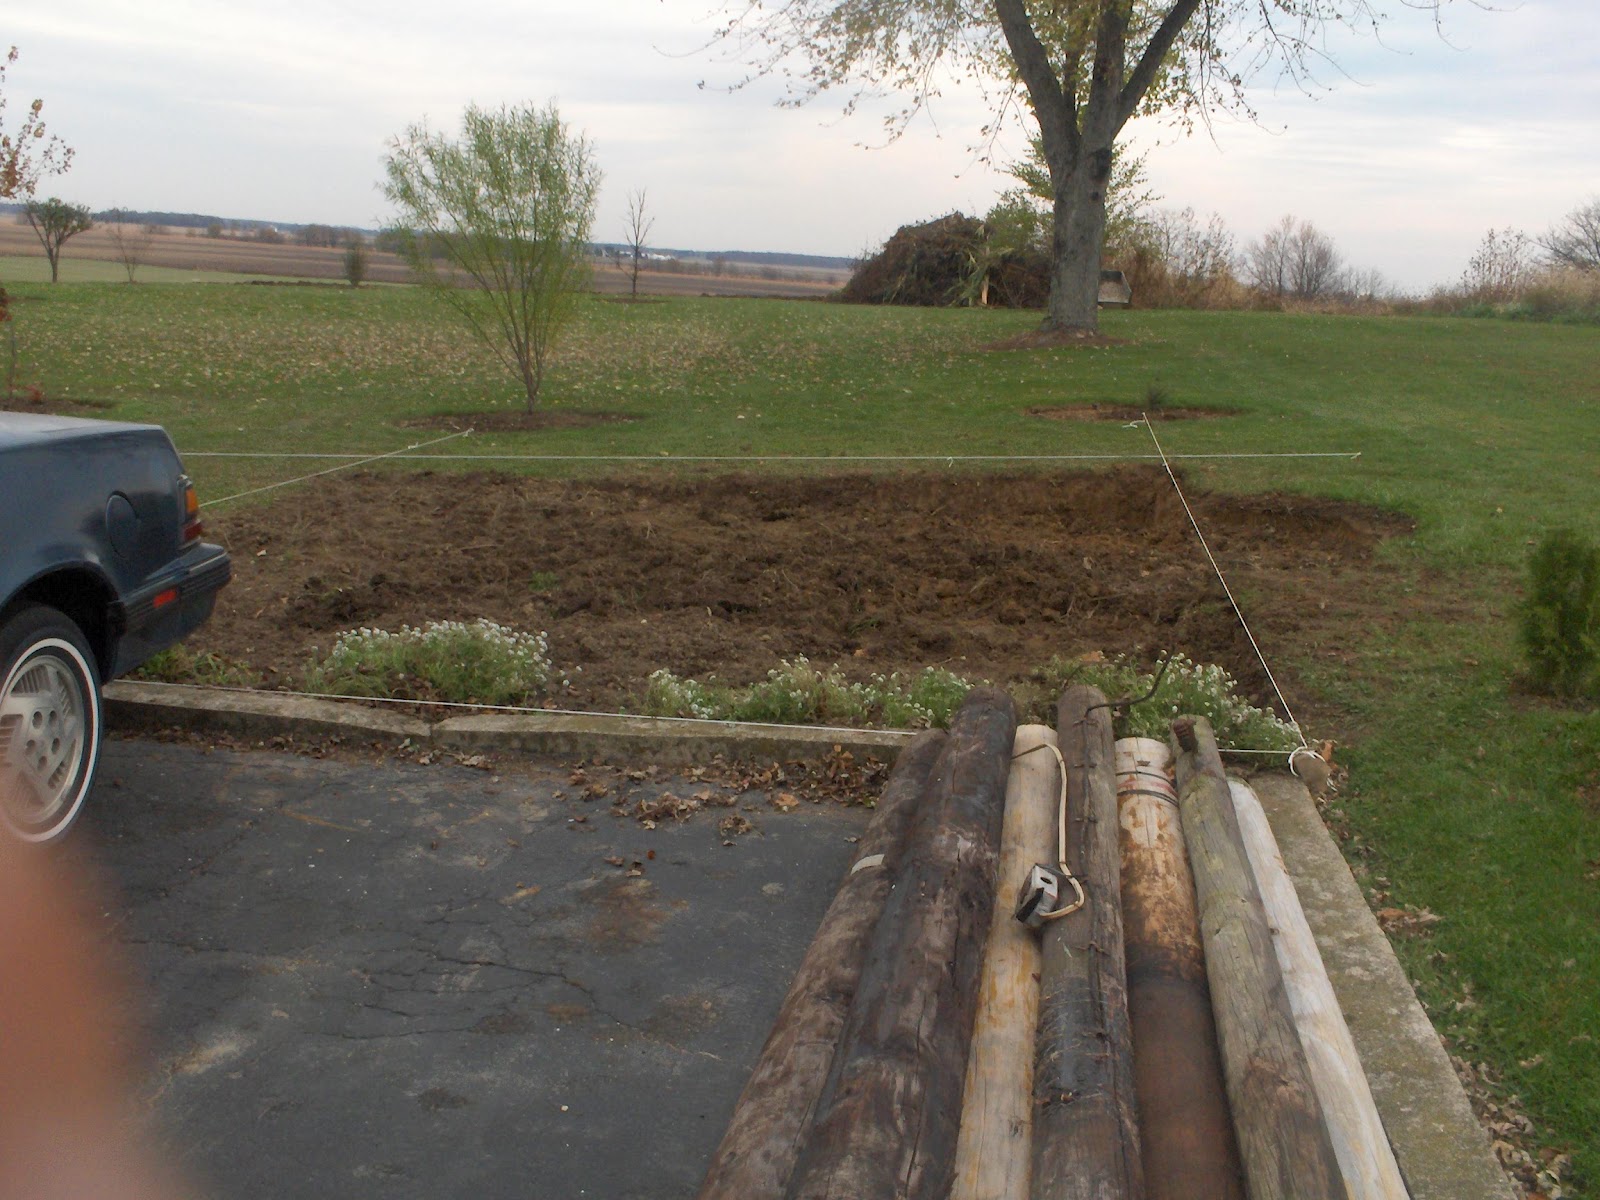  : How To Build a Workshop With Seven Telephone Poles and An Old Boot